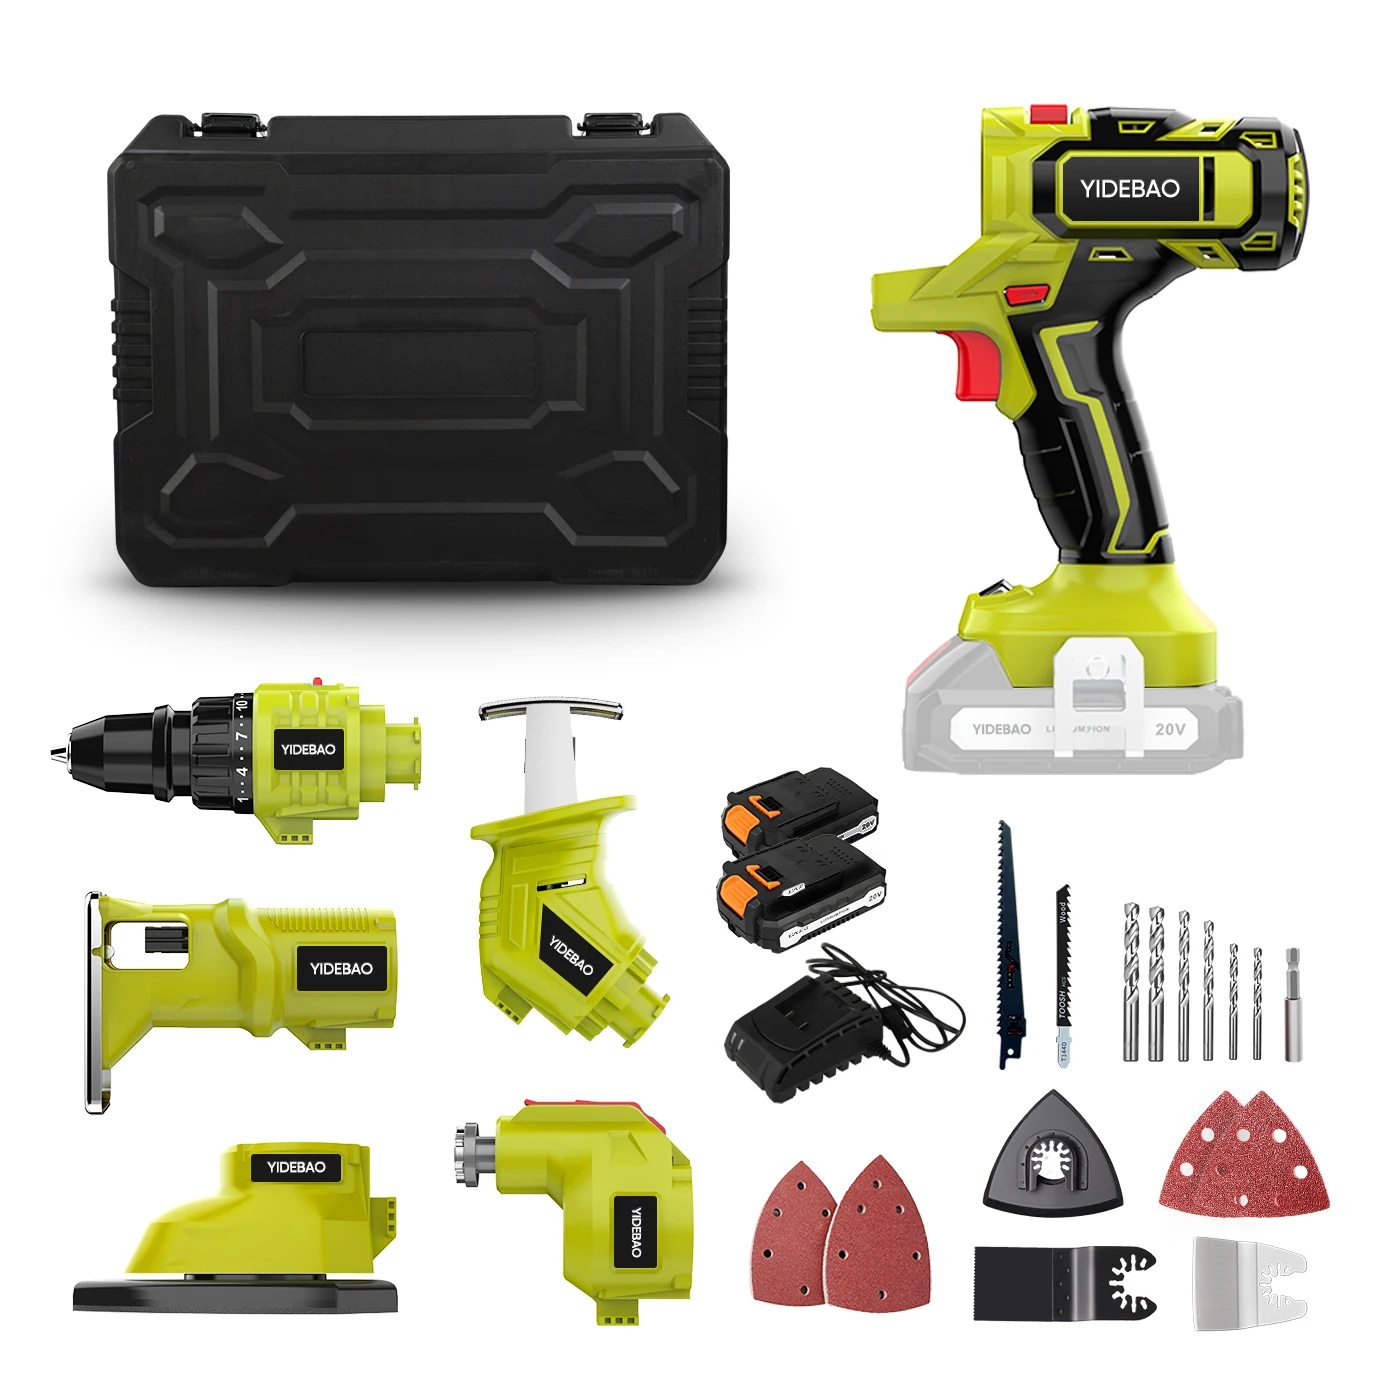 

2022 new arrival High Quality 5-in One Cordless power tools hand tool set 18v Combo kit drill too set sander